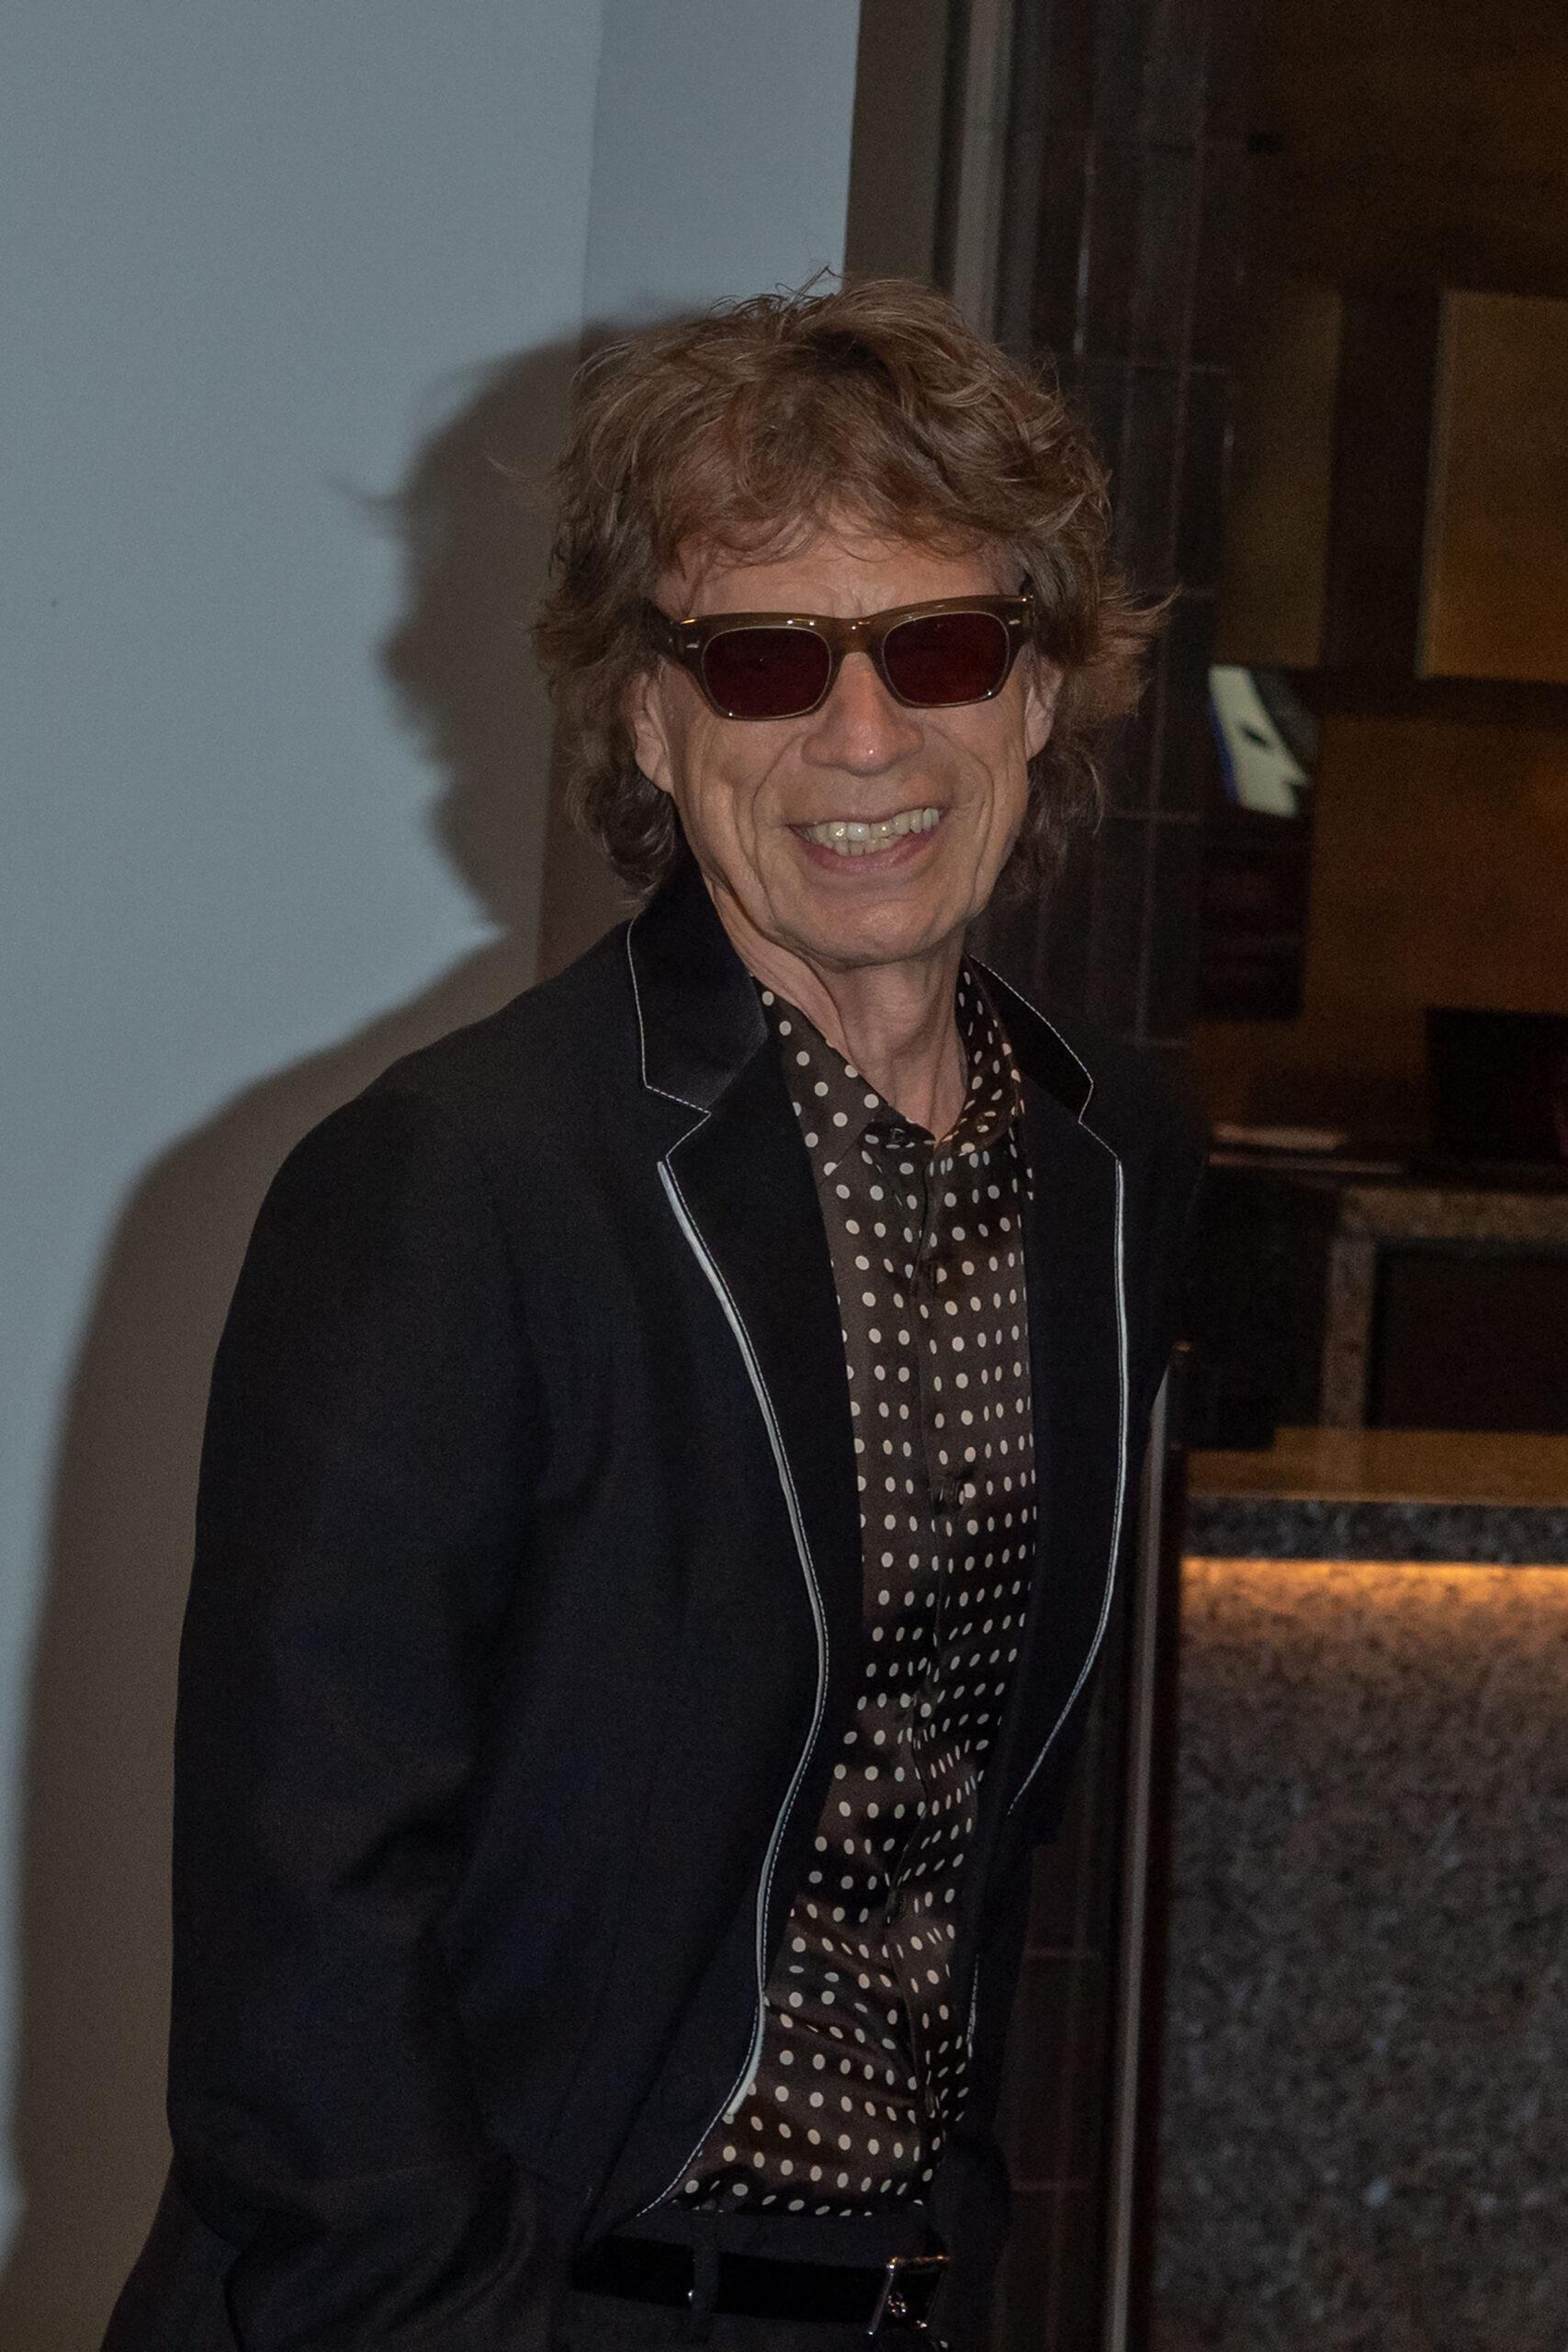 Rolling Stones Rocker Mick Jagger, 79, Is Reportedly Engaged To Melanie Hamrick, 36